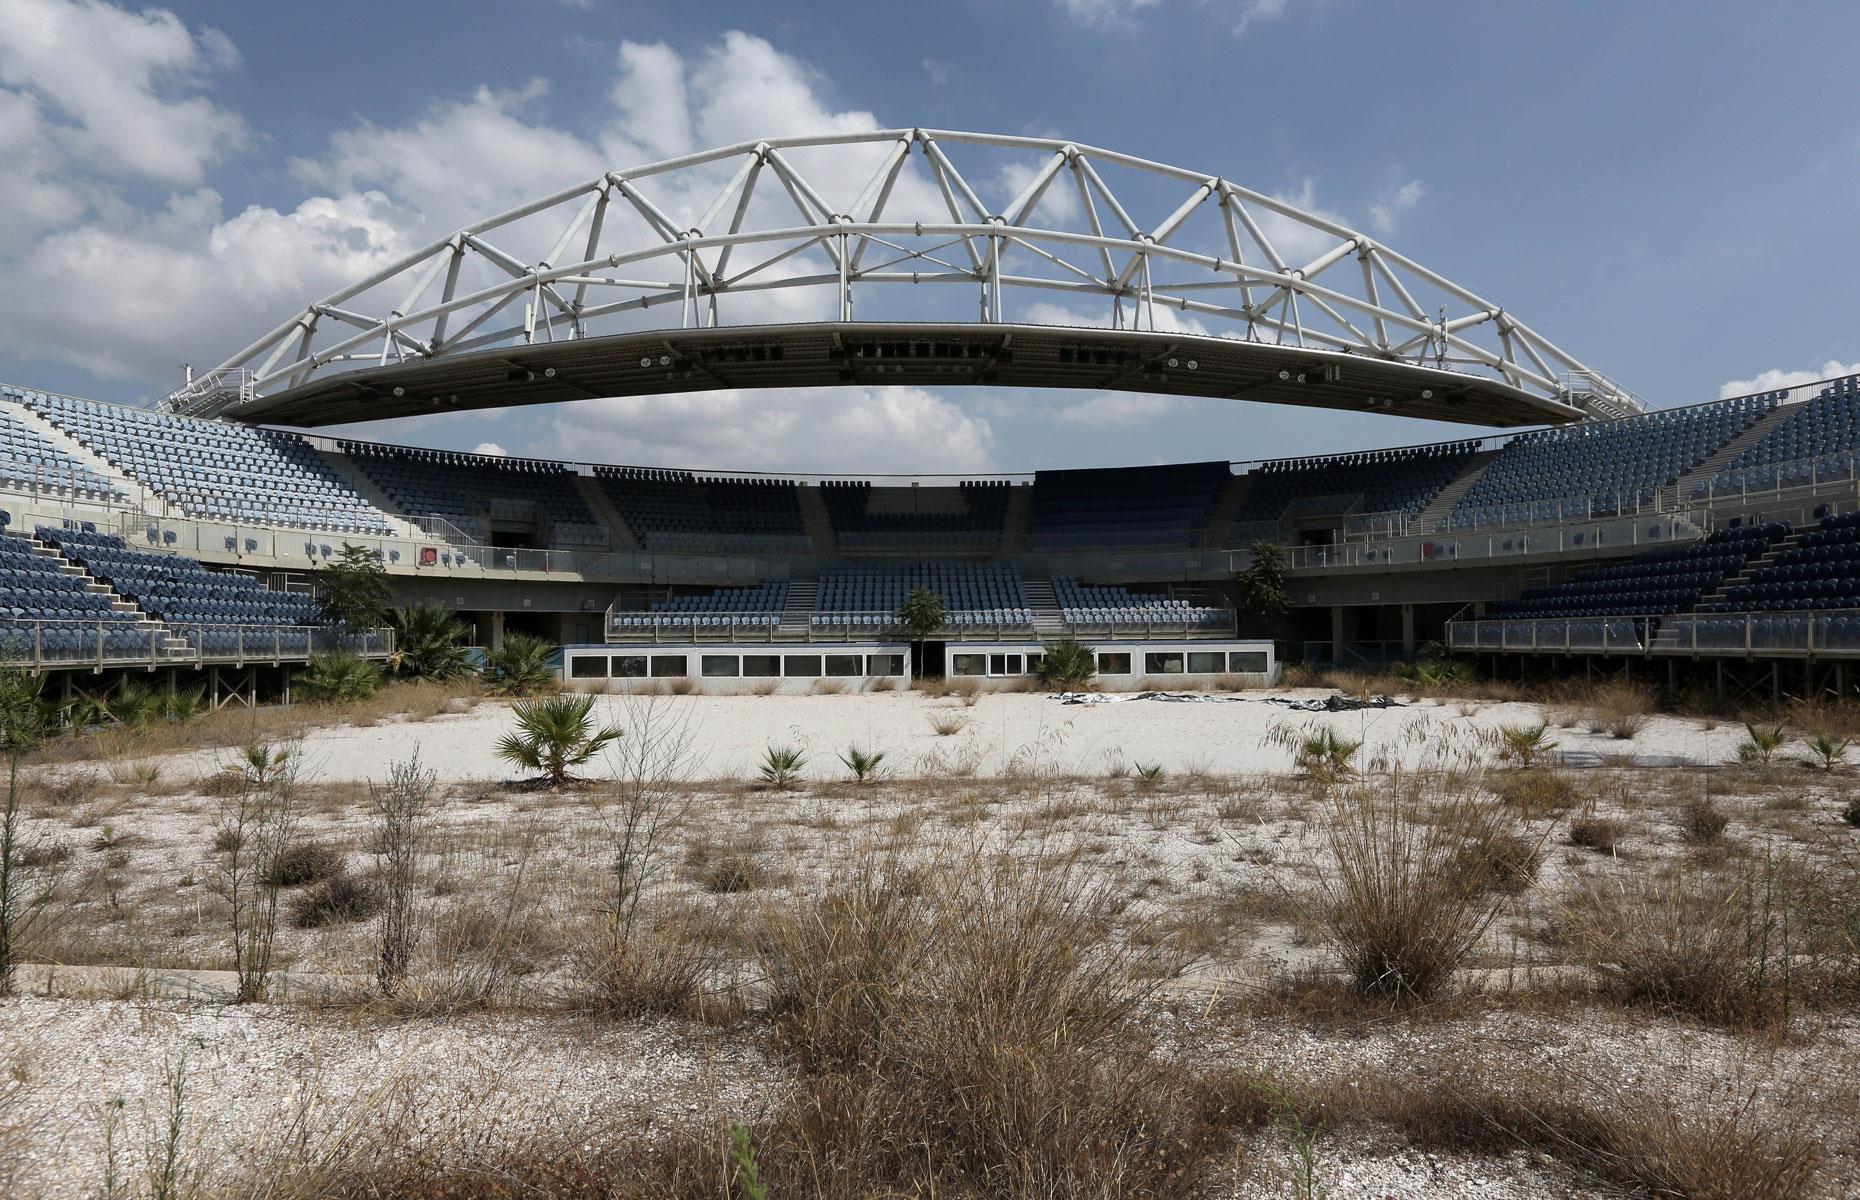 Why is Qatar dismantling some of its stadiums? What are white elephants?